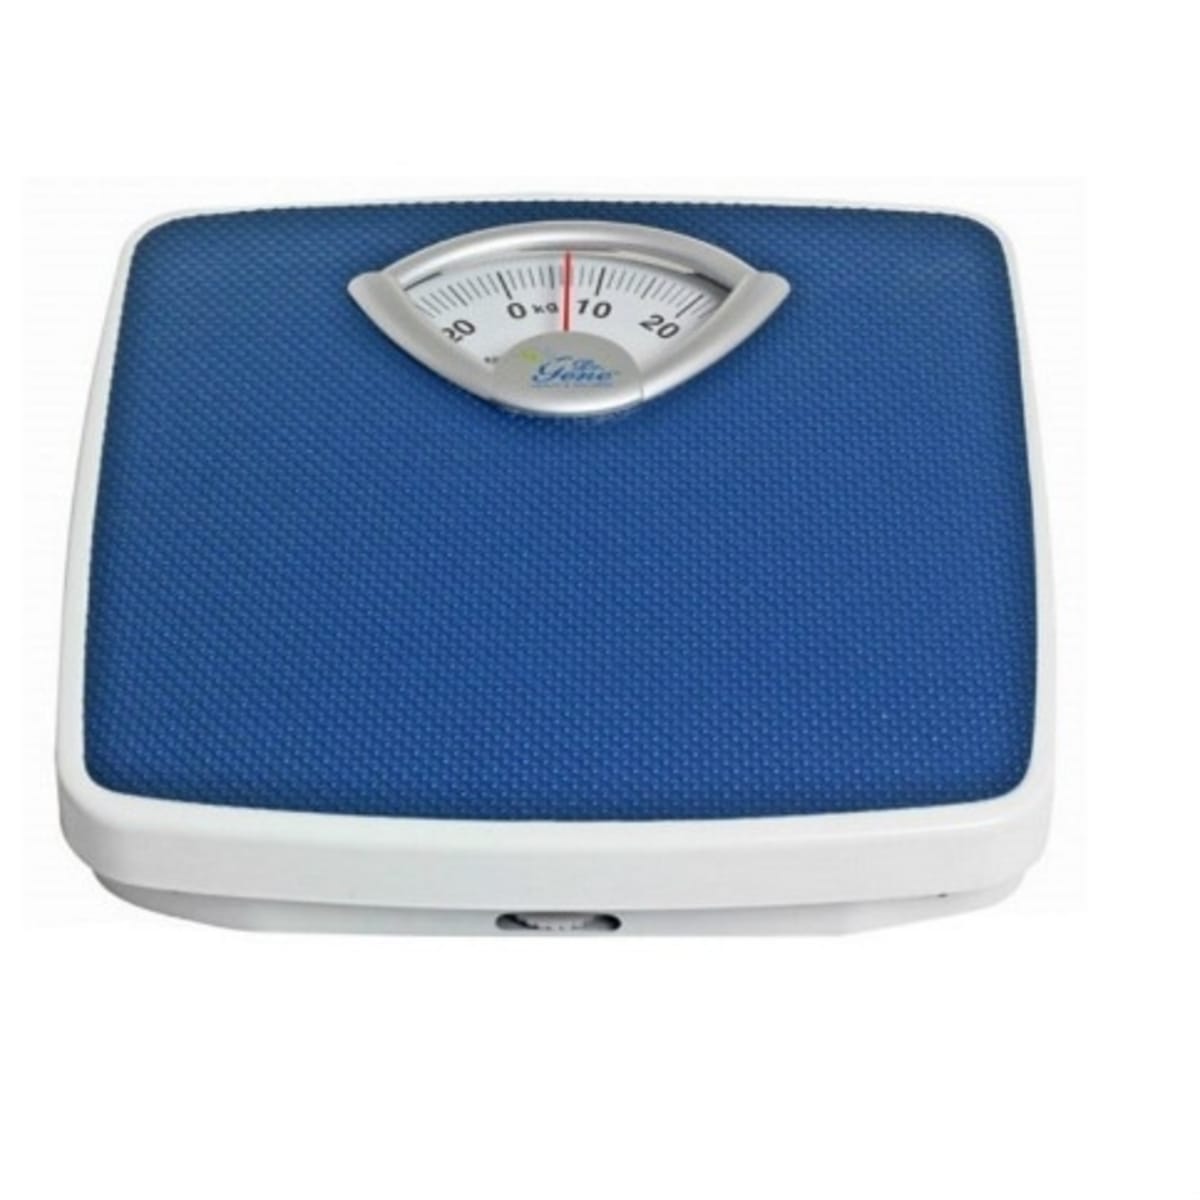 https://www-konga-com-res.cloudinary.com/w_400,f_auto,fl_lossy,dpr_3.0,q_auto/media/catalog/product/A/n/Analog-Personal-Weighing-Scale--5788616_3.jpg